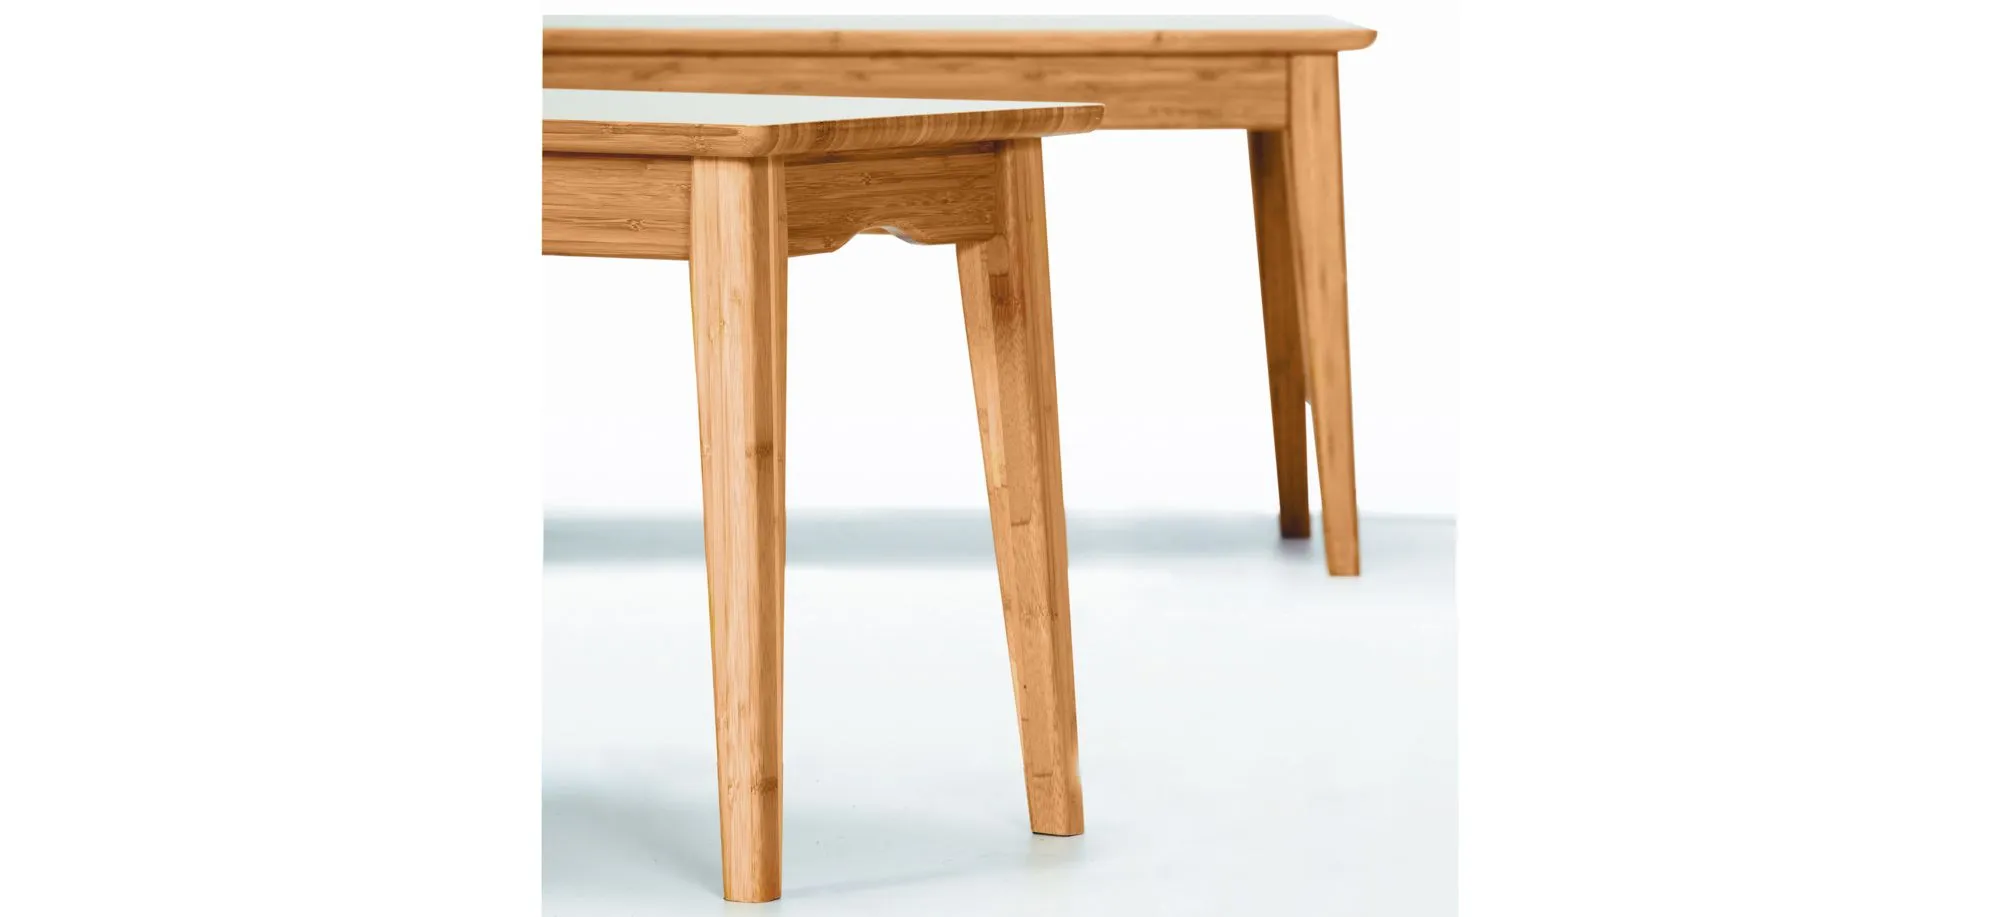 Currant Short Dining Bench in Caramelized by Greenington